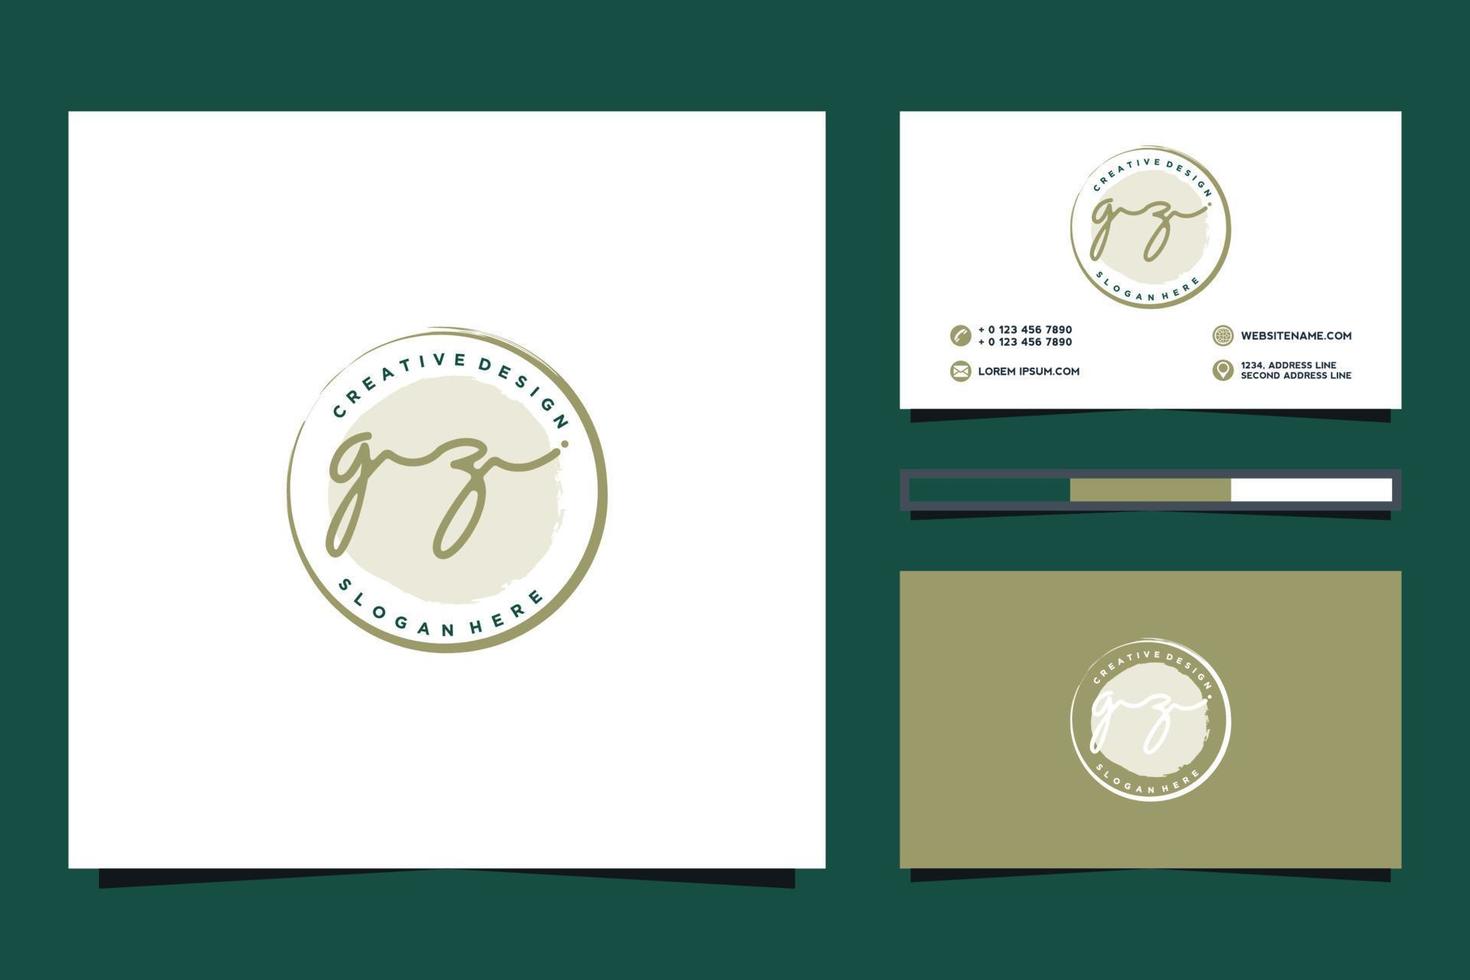 Initial GZ Feminine logo collections and business card templat Premium Vector